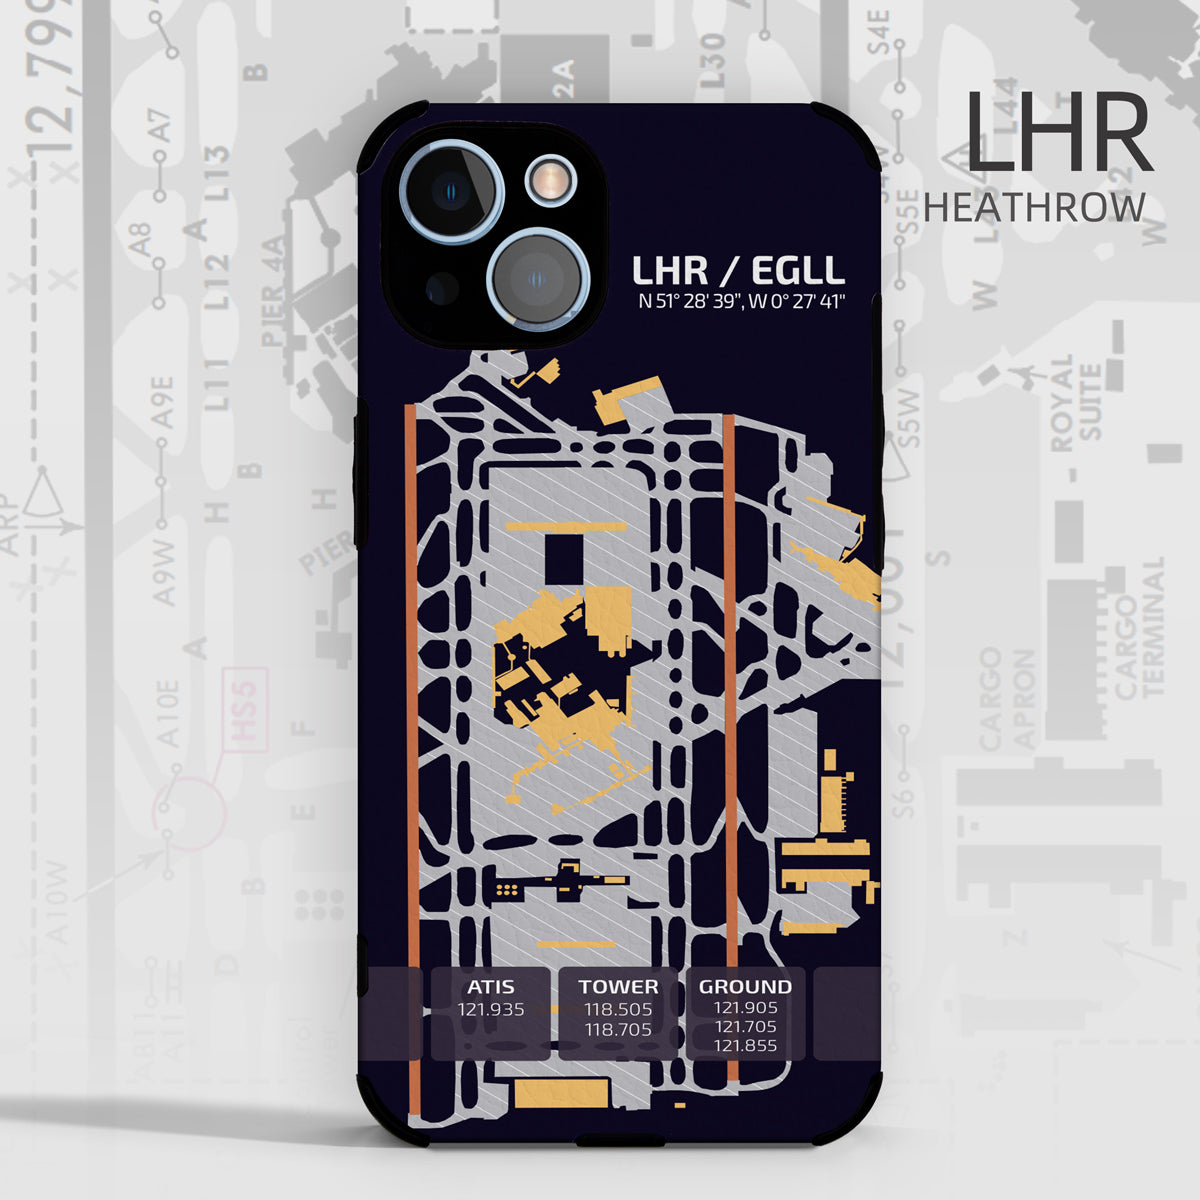 London Heathrow Airport Diagram Phone Case LHR/EGLL Aviation gift airline pilot crew iphone apple samsung android huawei xiaomi